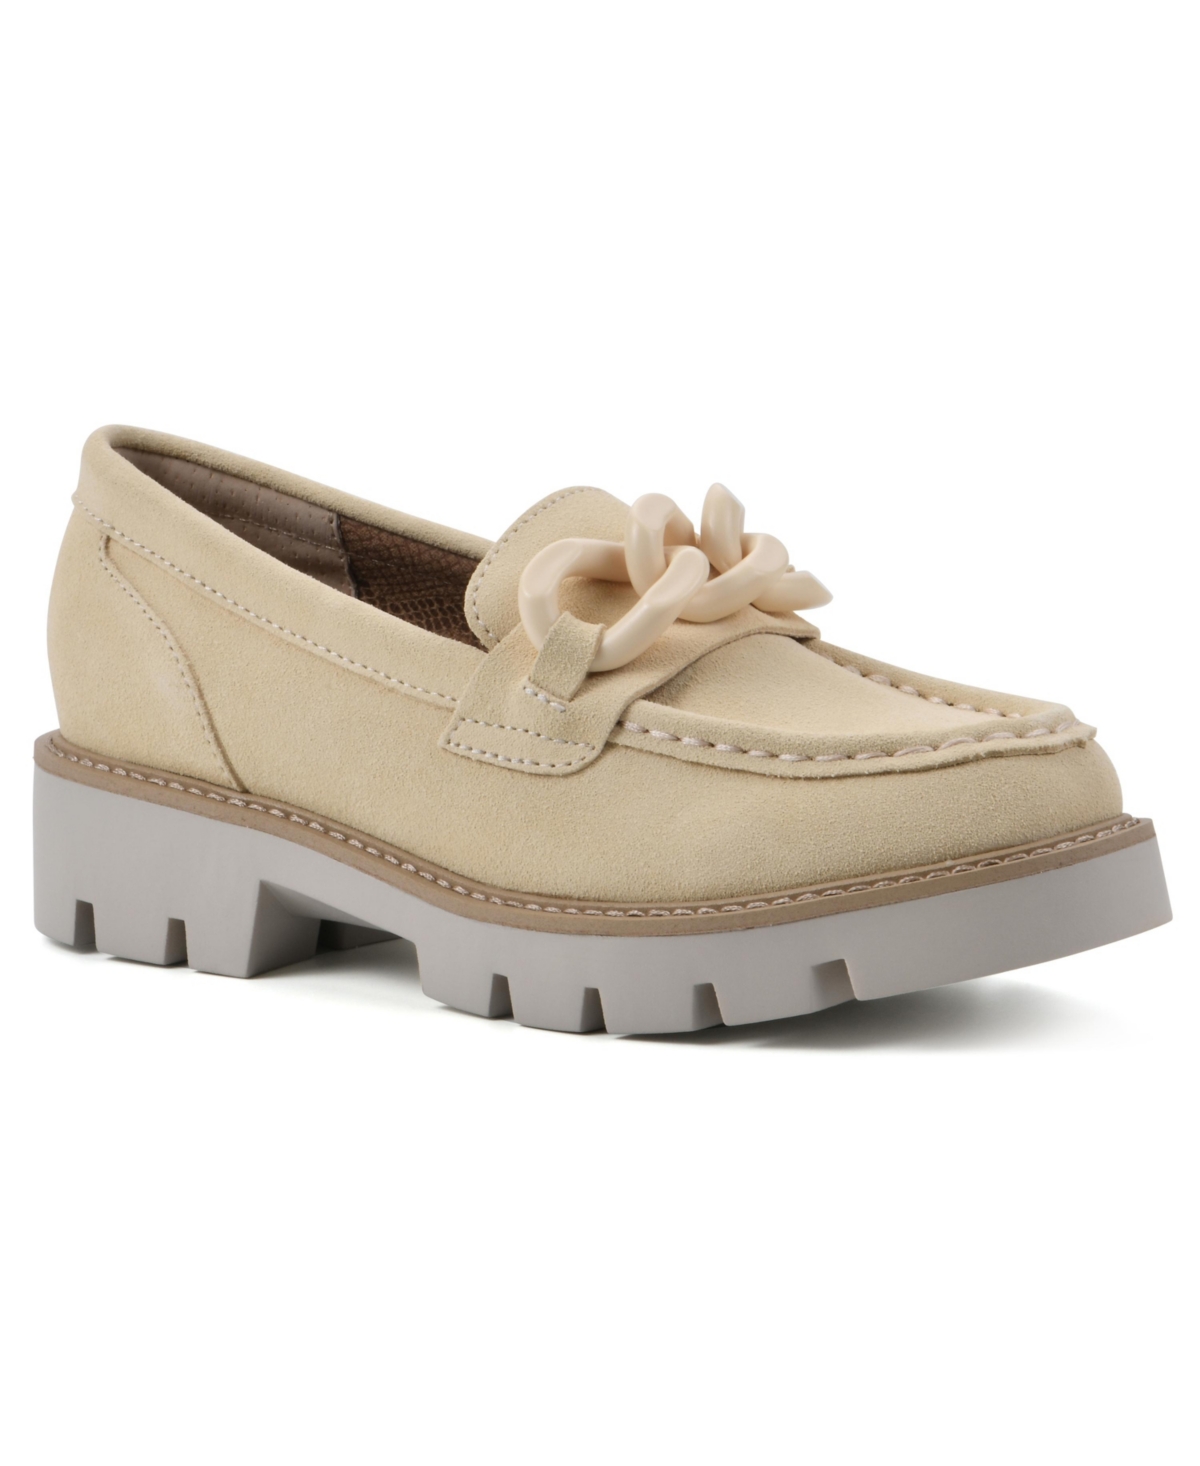 Women's Goodie Lug Sole Loafers - Butter Cream, Suede